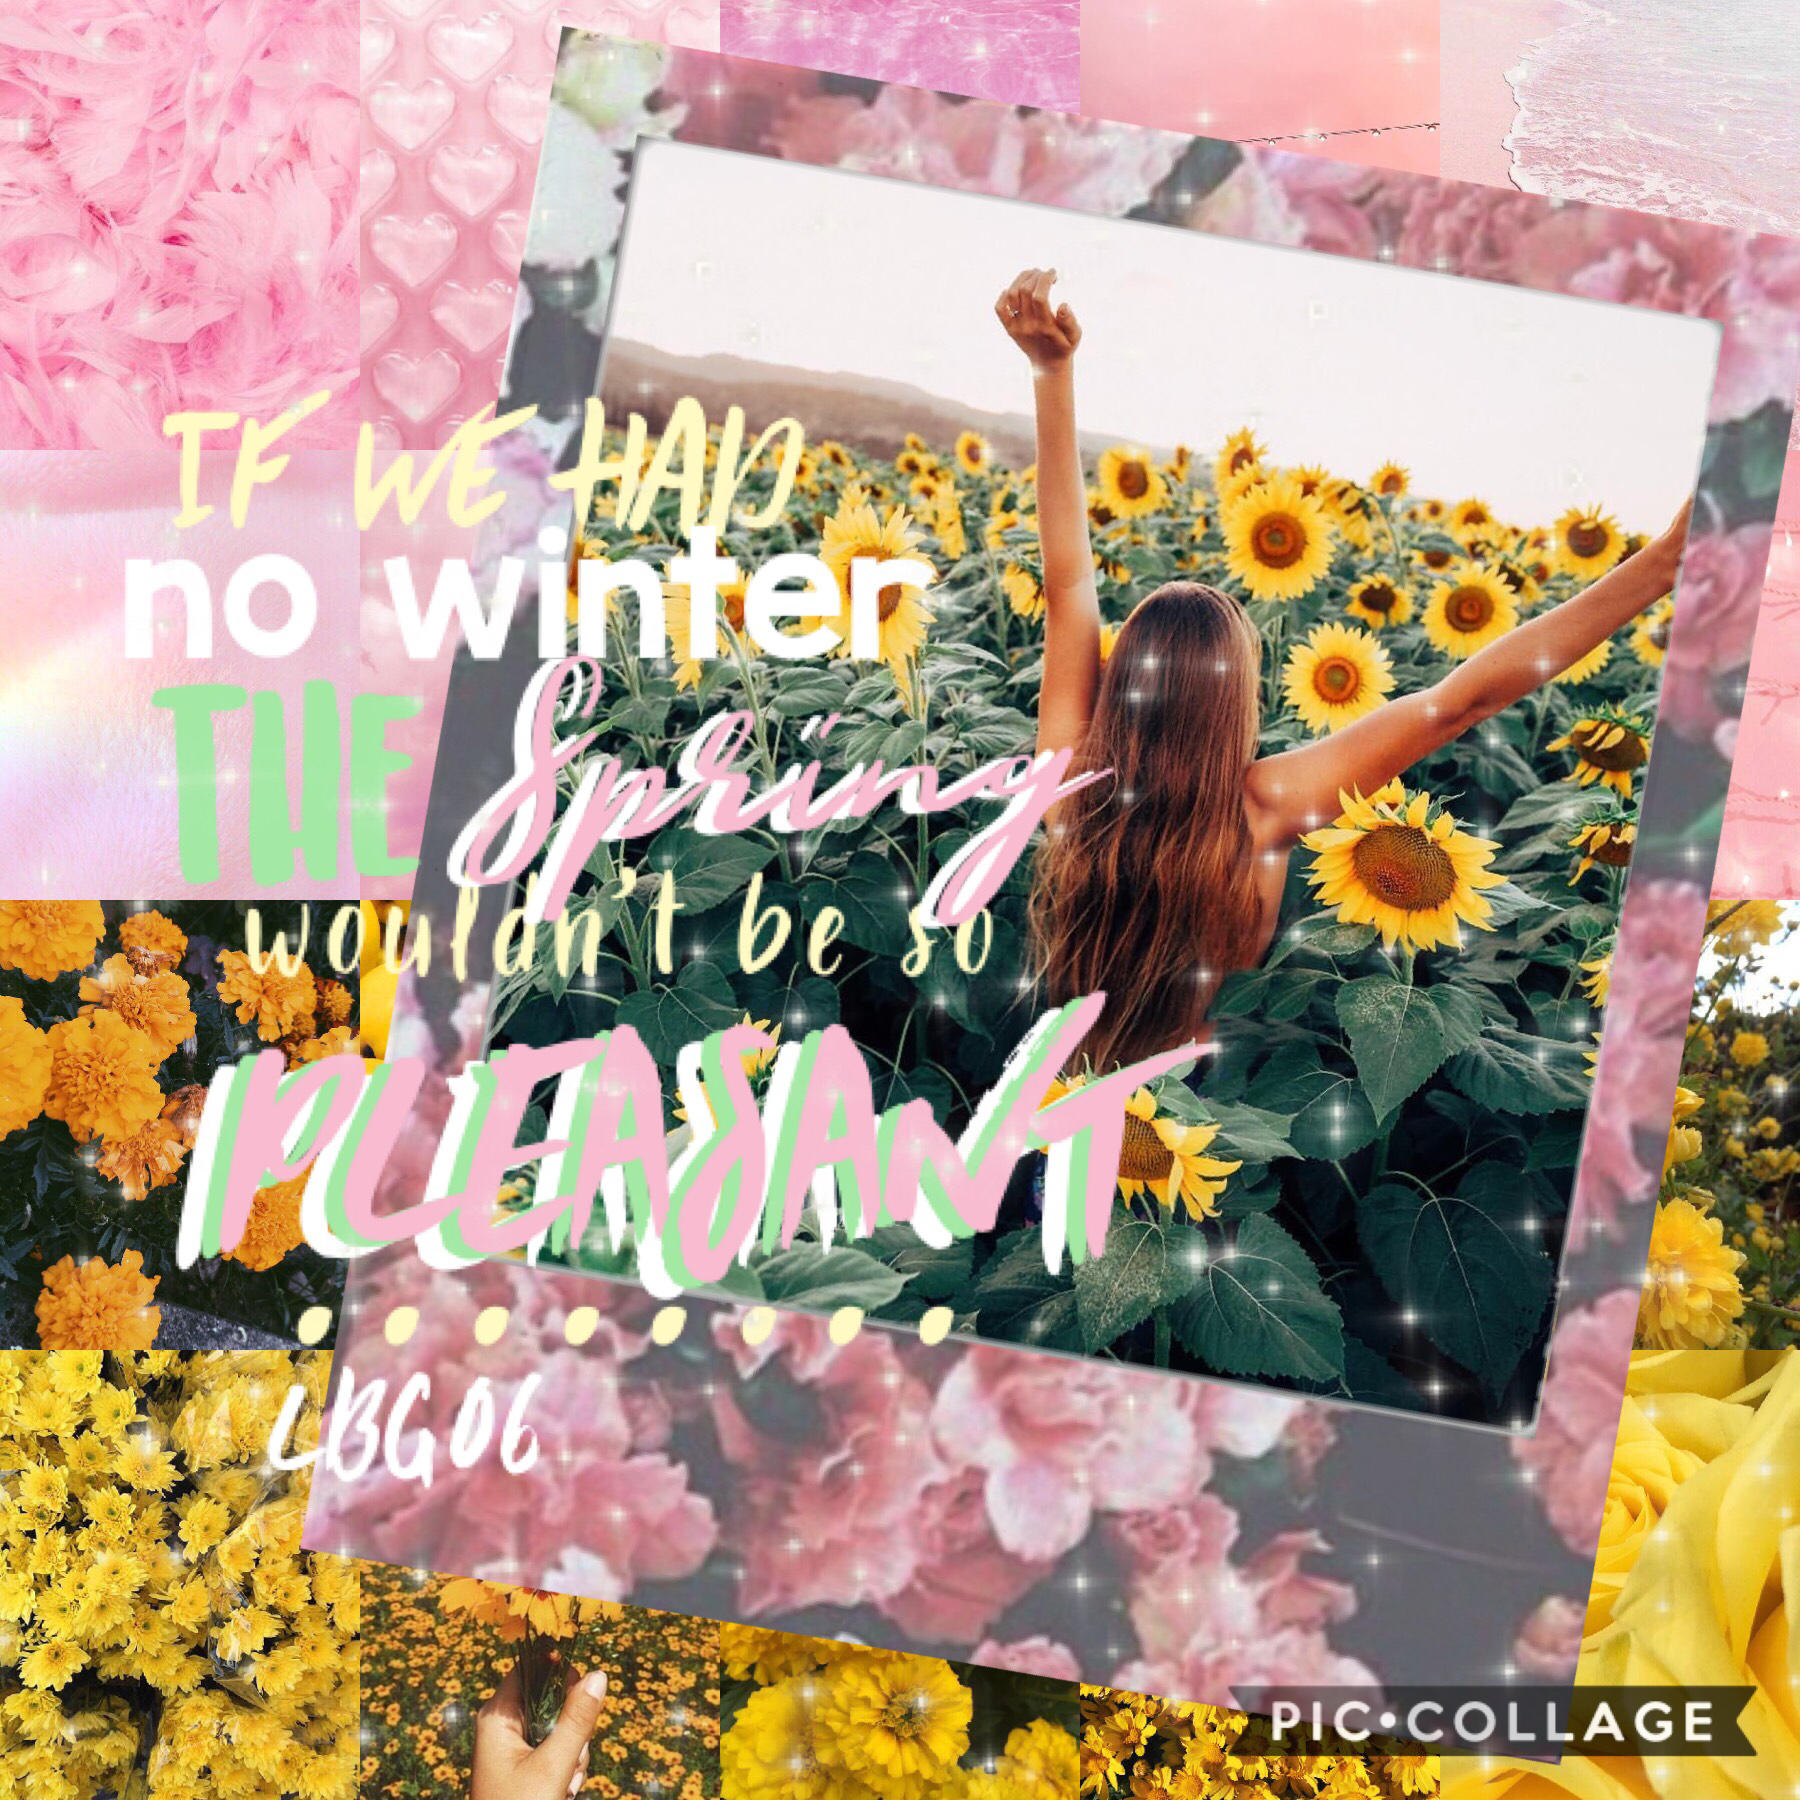 🌻Tappers🌸

HAPPY SPRING!!!
💐🌷🌸🌻☀️🐰🐣🦋

Q// when is your spring break?
A// end of April it’s too far awaaaayy 😫

💕XOXOXO💕